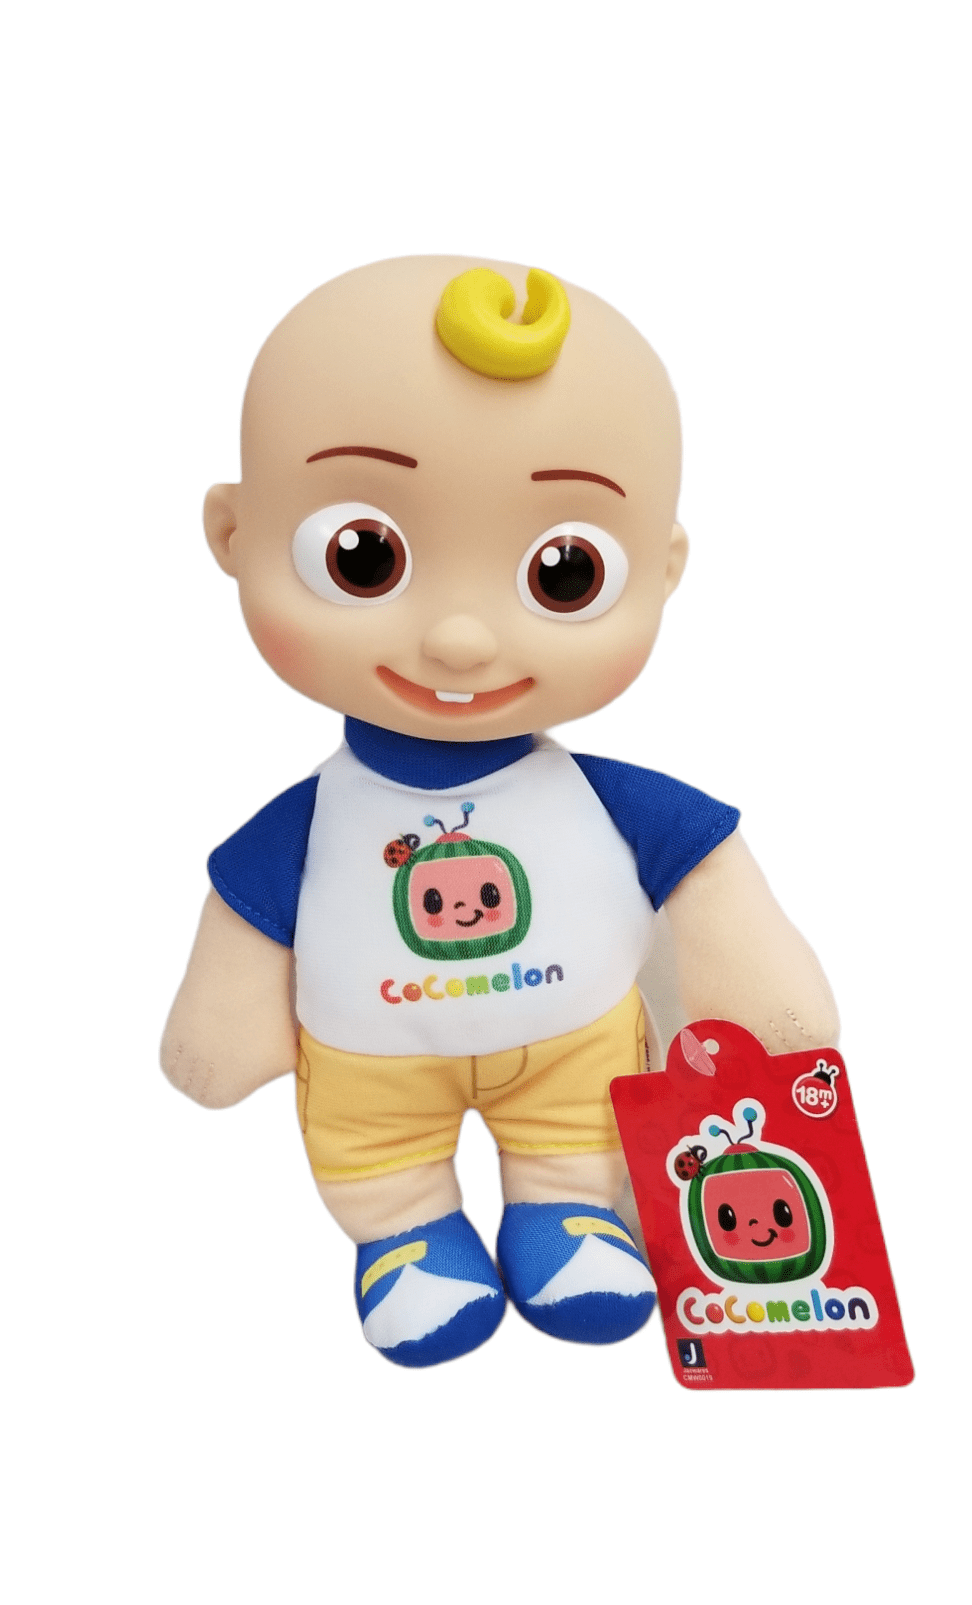 Details about   Cocomelon JJ Fun Plush Toy Watermelon Stuffed Doll Educational Birthday Gift US 